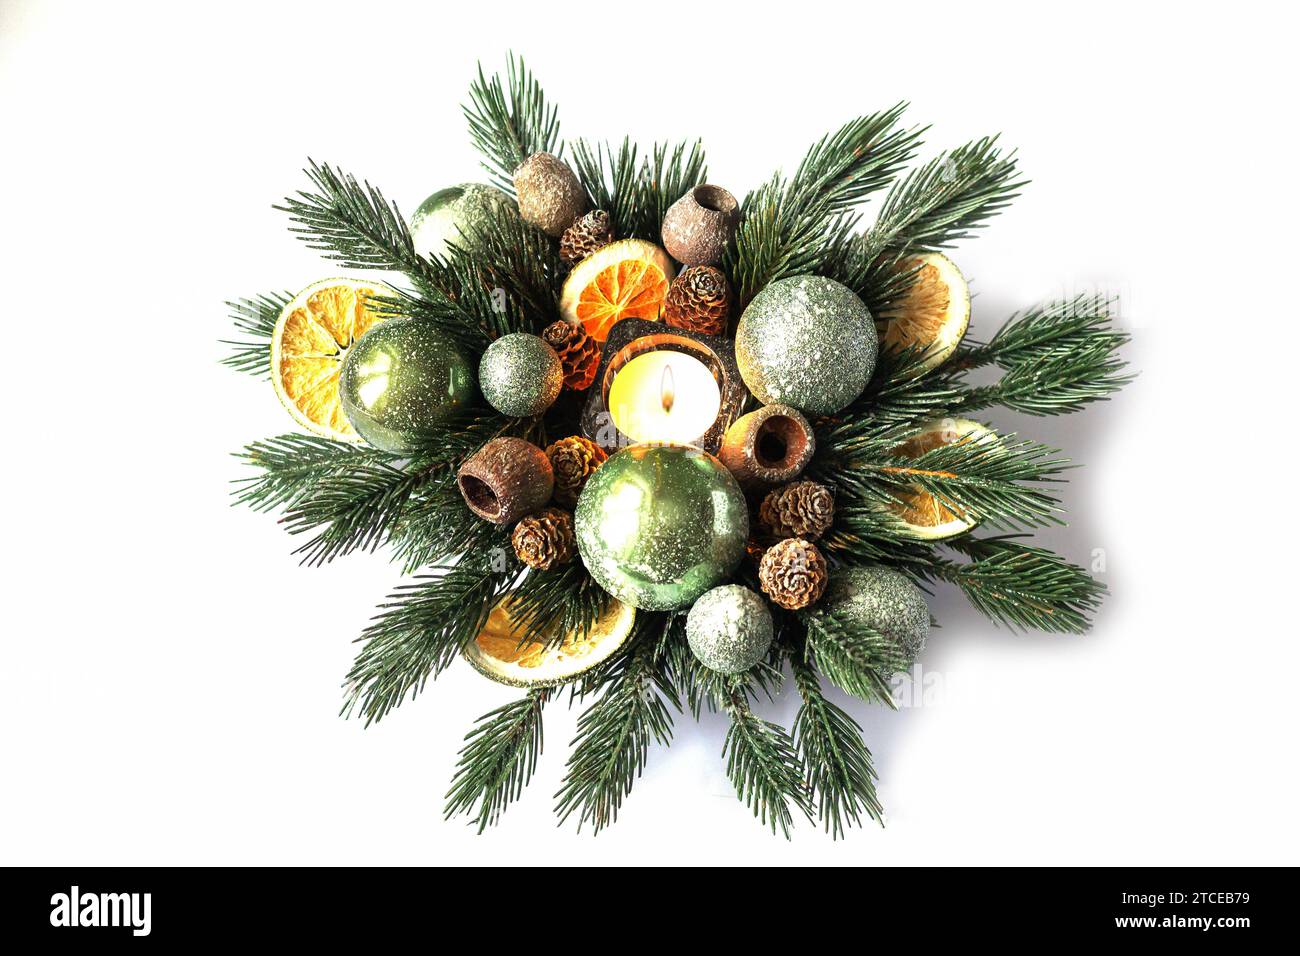 Christmas holidays composition with candle, spruce branches and decorations isolated on white background Stock Photo